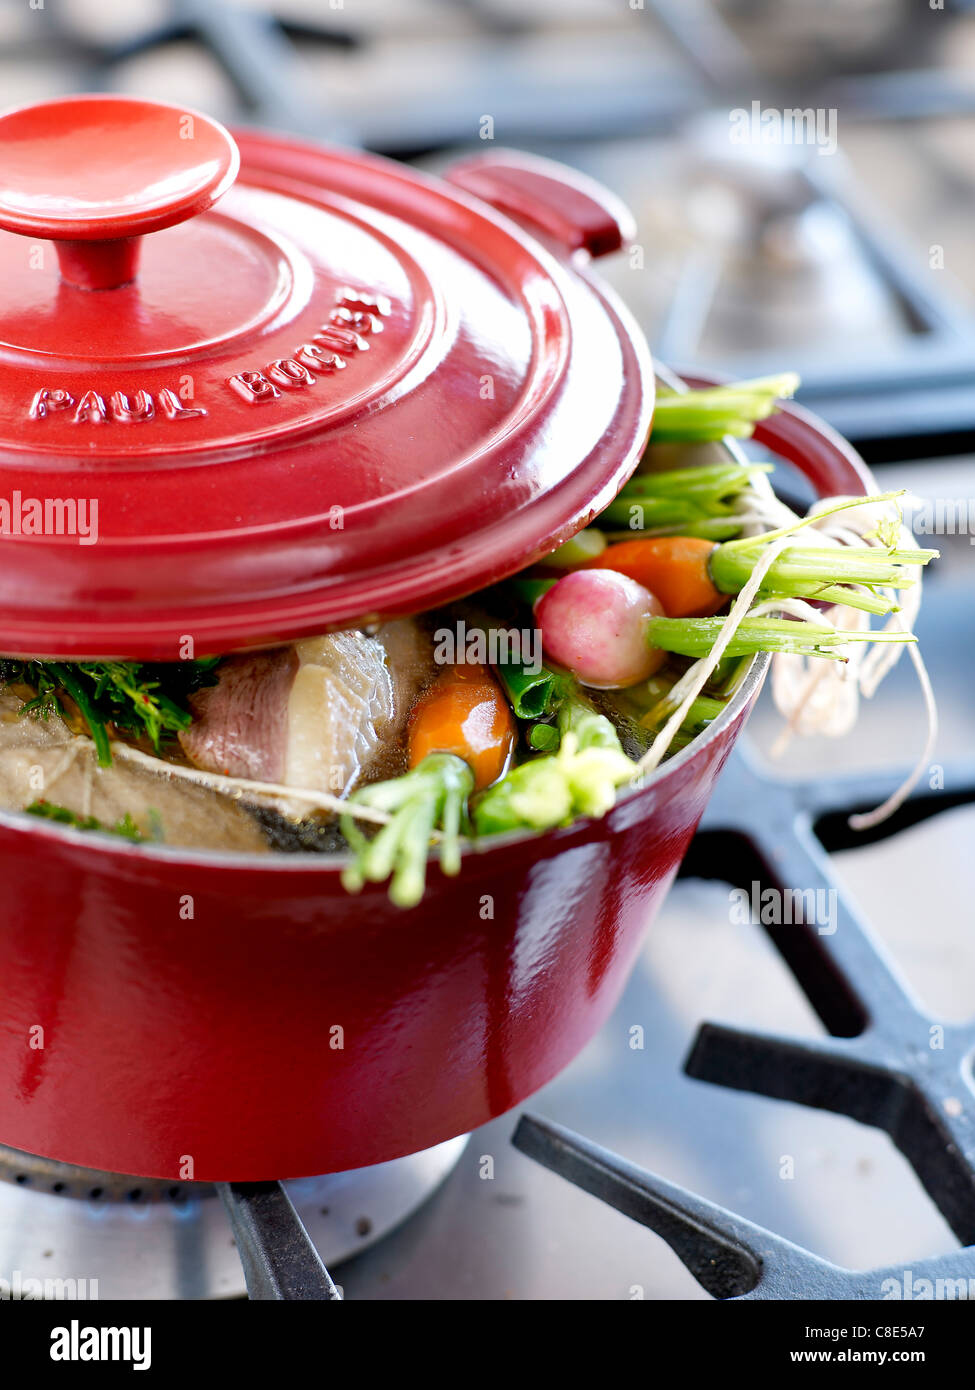 Stringed roast beef with vegetables in a casserole dish Stock Photo